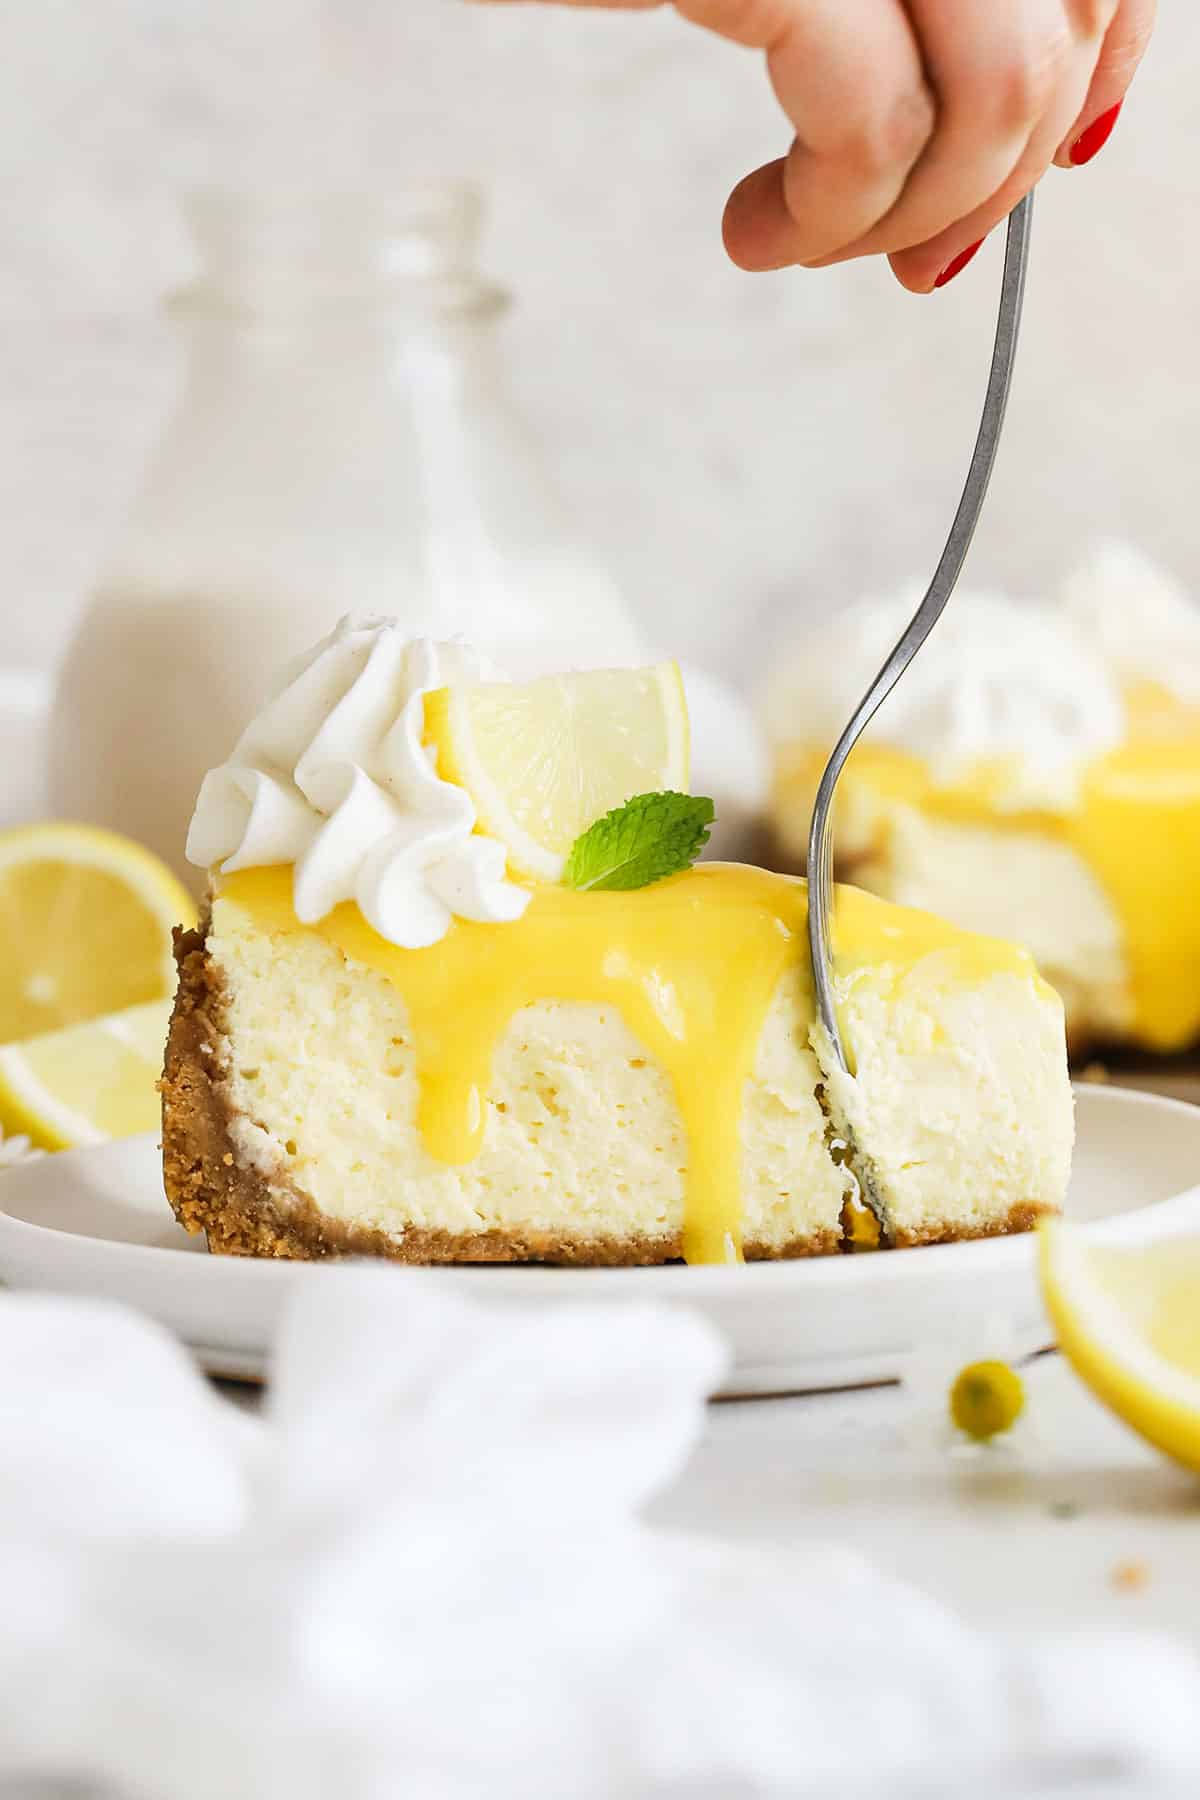 a fork getting a bite from a slice of gluten-free lemon cheesecake